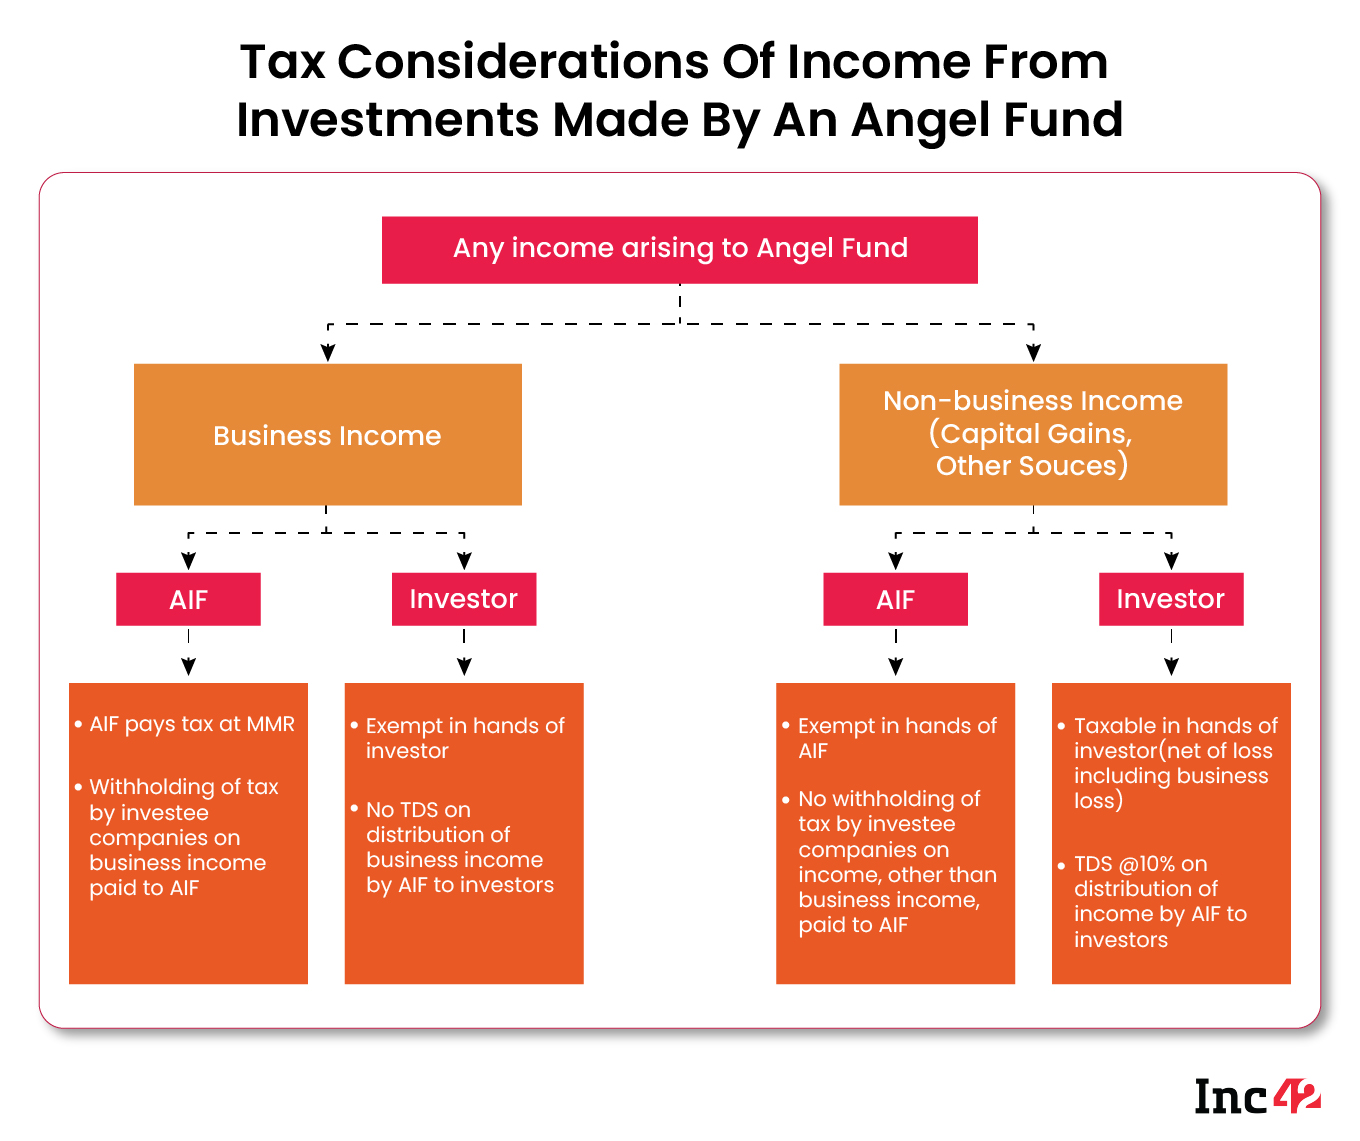 ax Considerations Of Income From Investments Made By An Angel Fund 